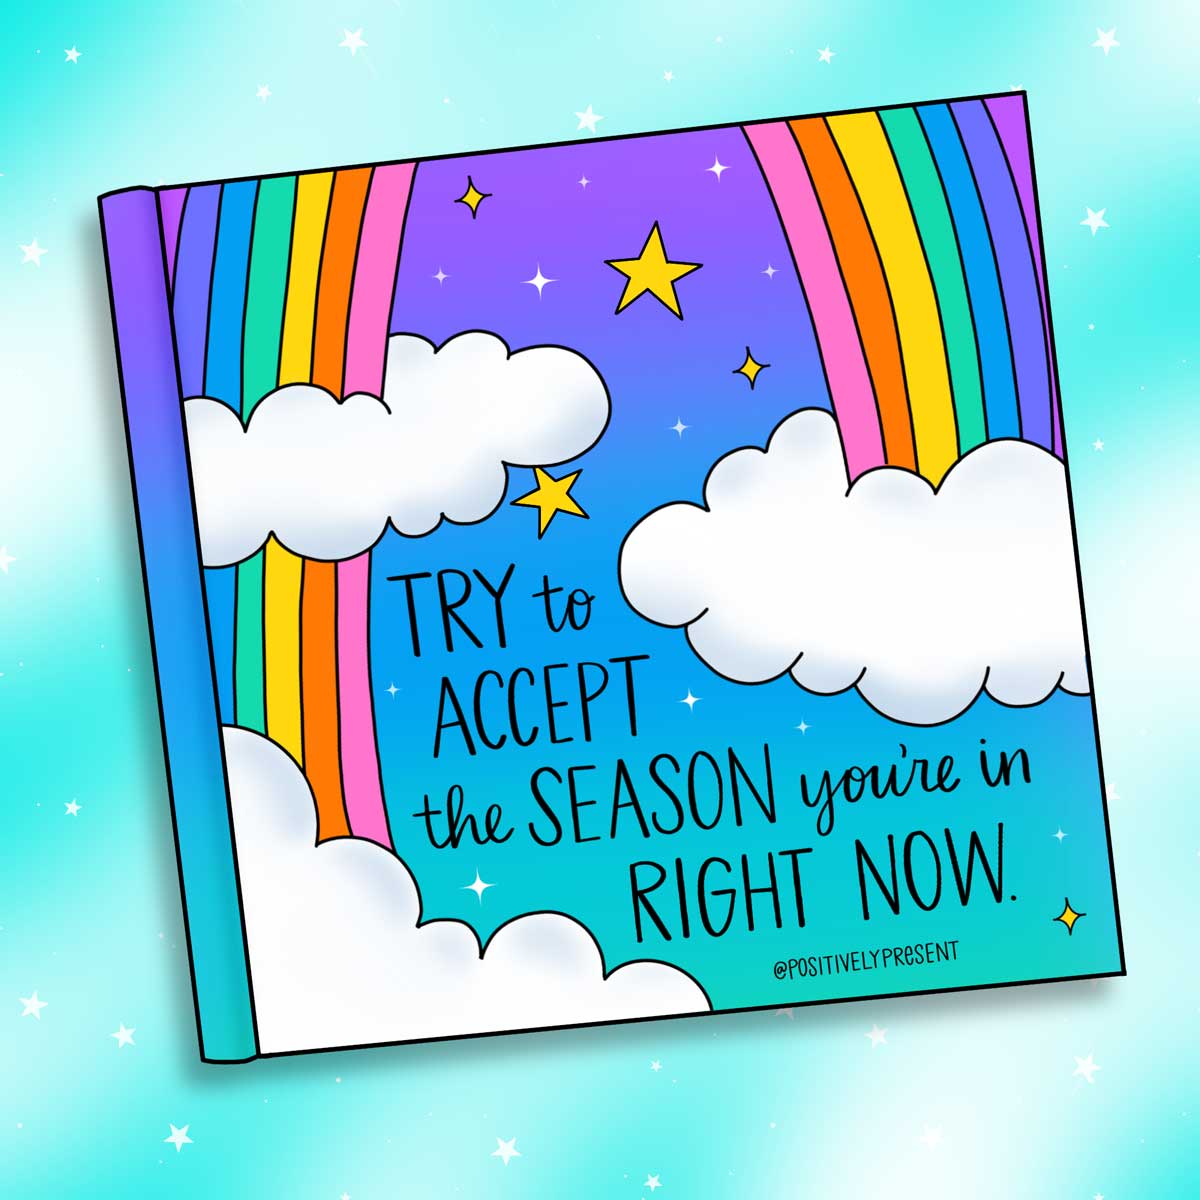 rainbow book illustration says accept the season you're in.